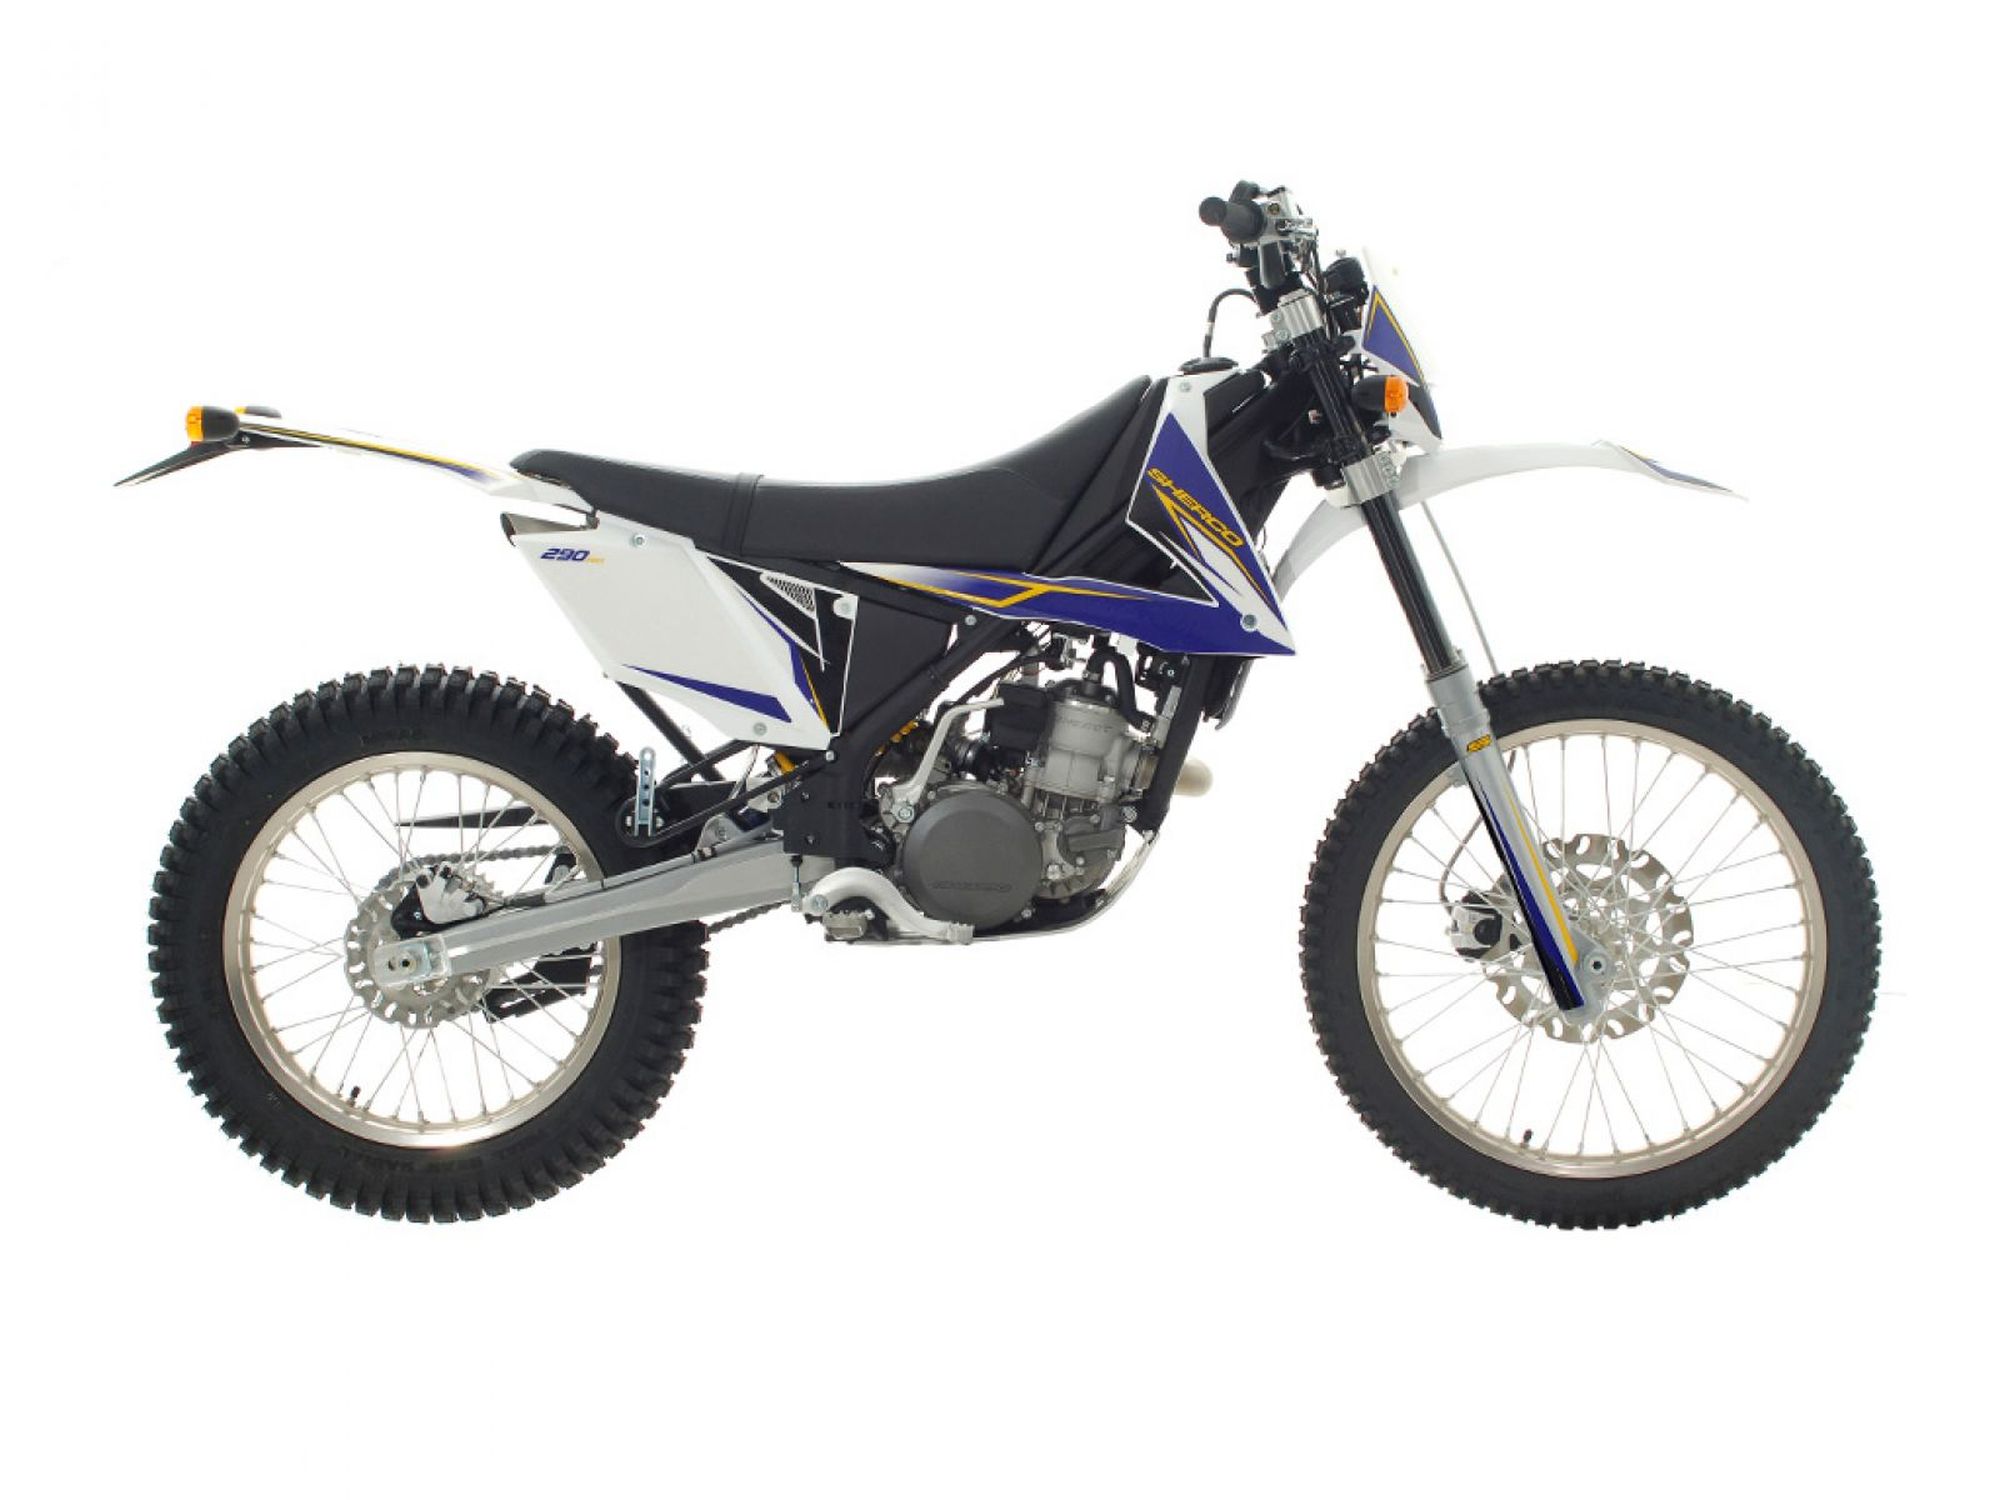 Sherco X-Ride 125 - technical data, prices, reviews